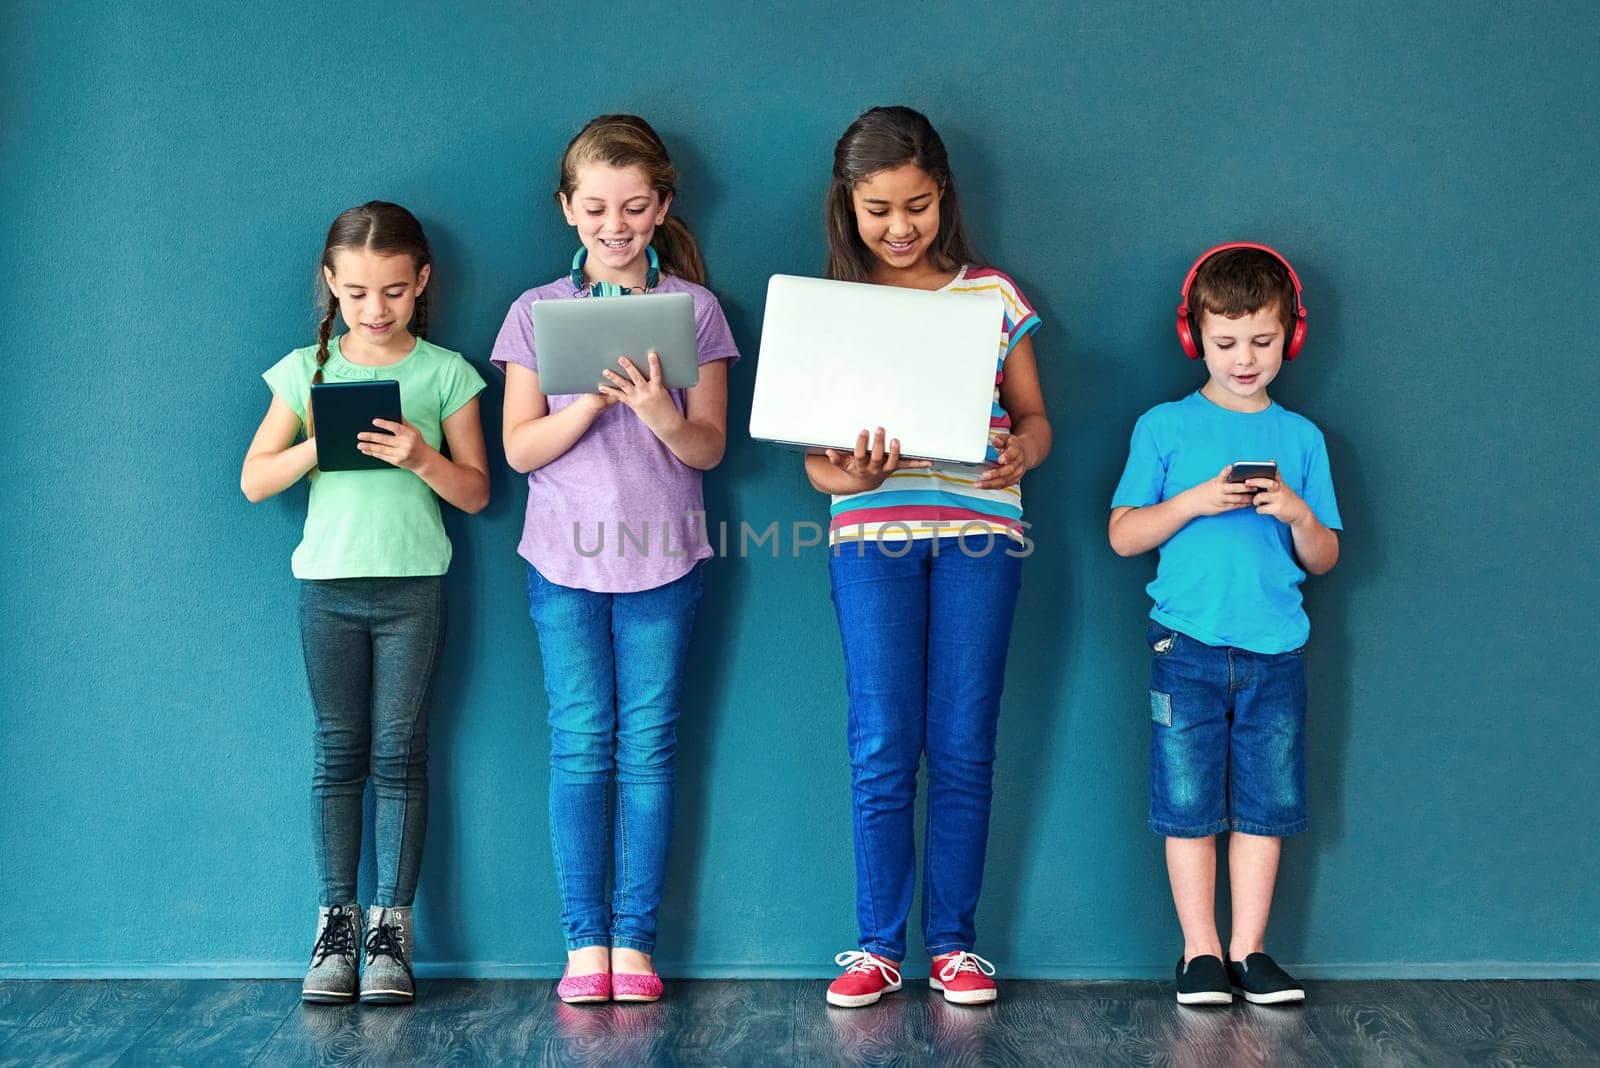 Leaving wireless technology in the hands of kids. Studio shot of a group of kids using wireless technology against a blue background